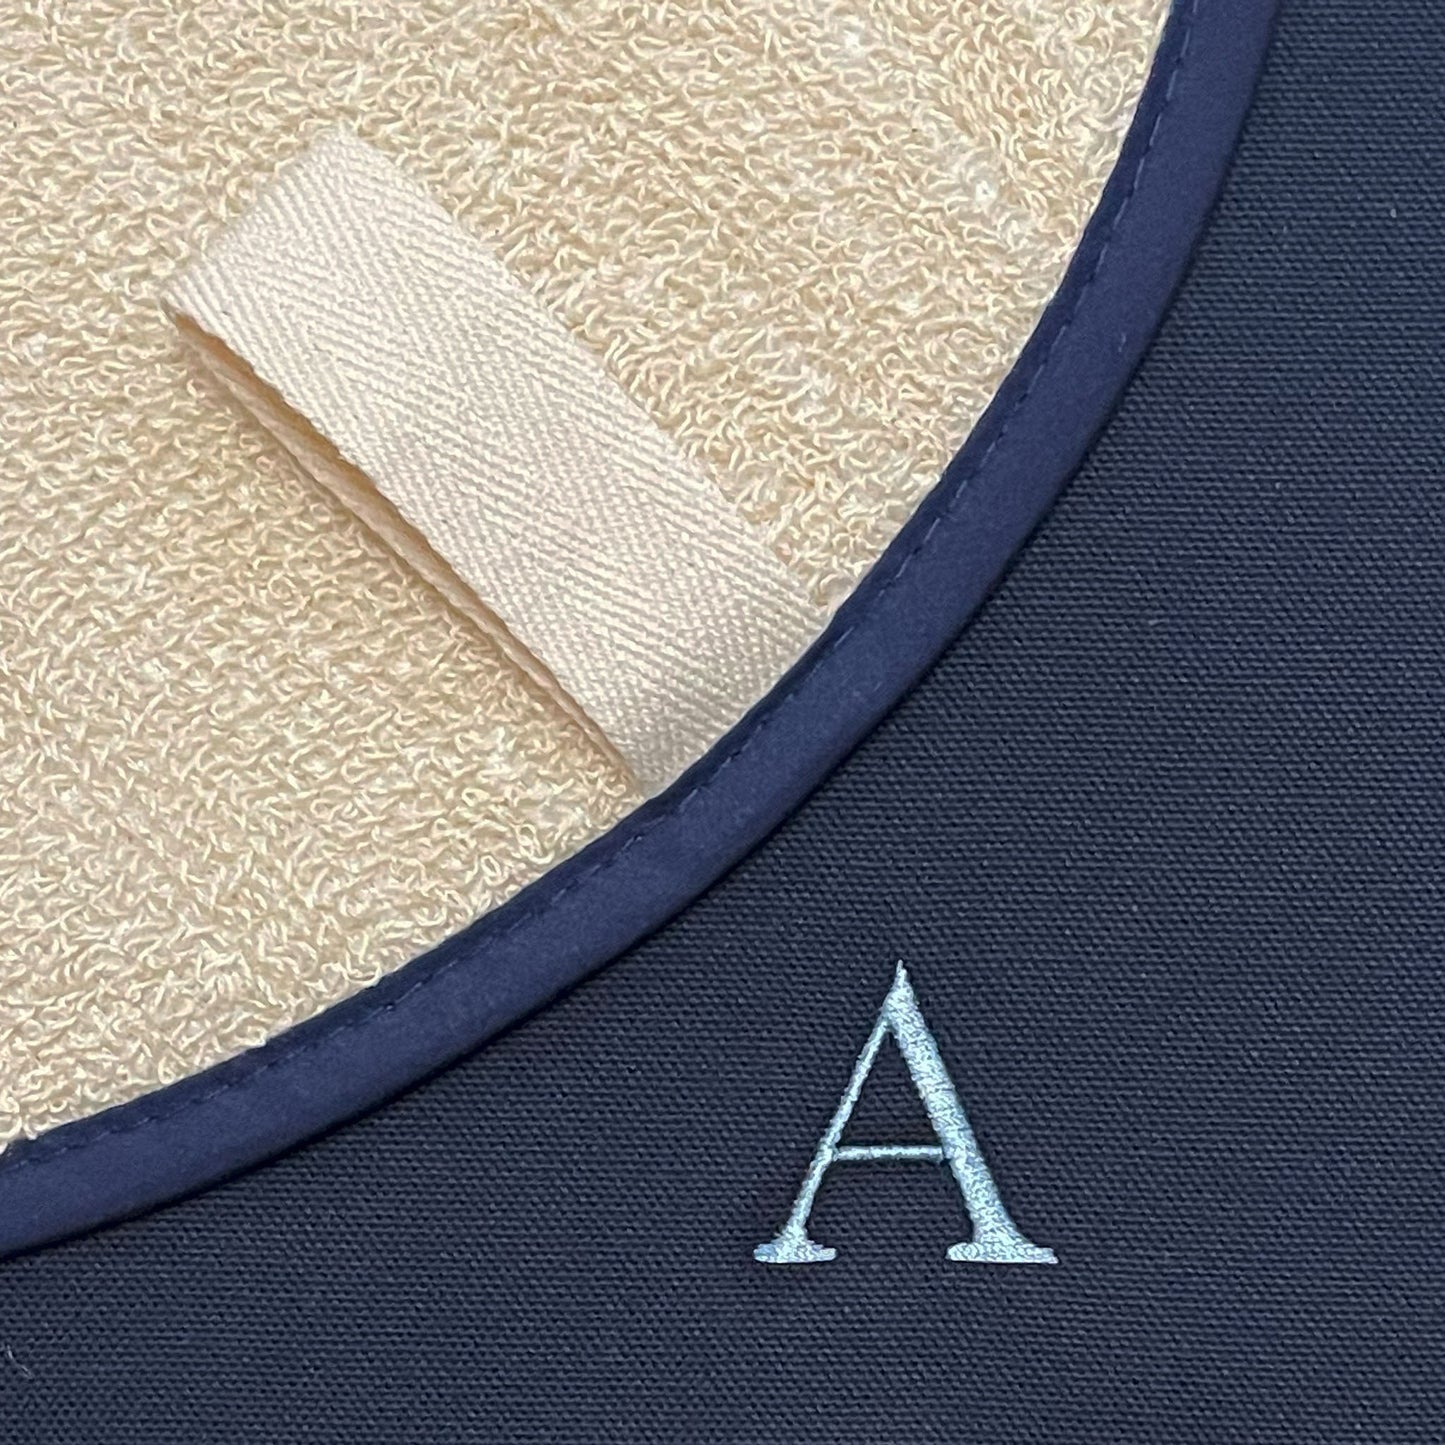 Personalised Monogram Chefs Pad in Plain Navy for use with AGA range cooker